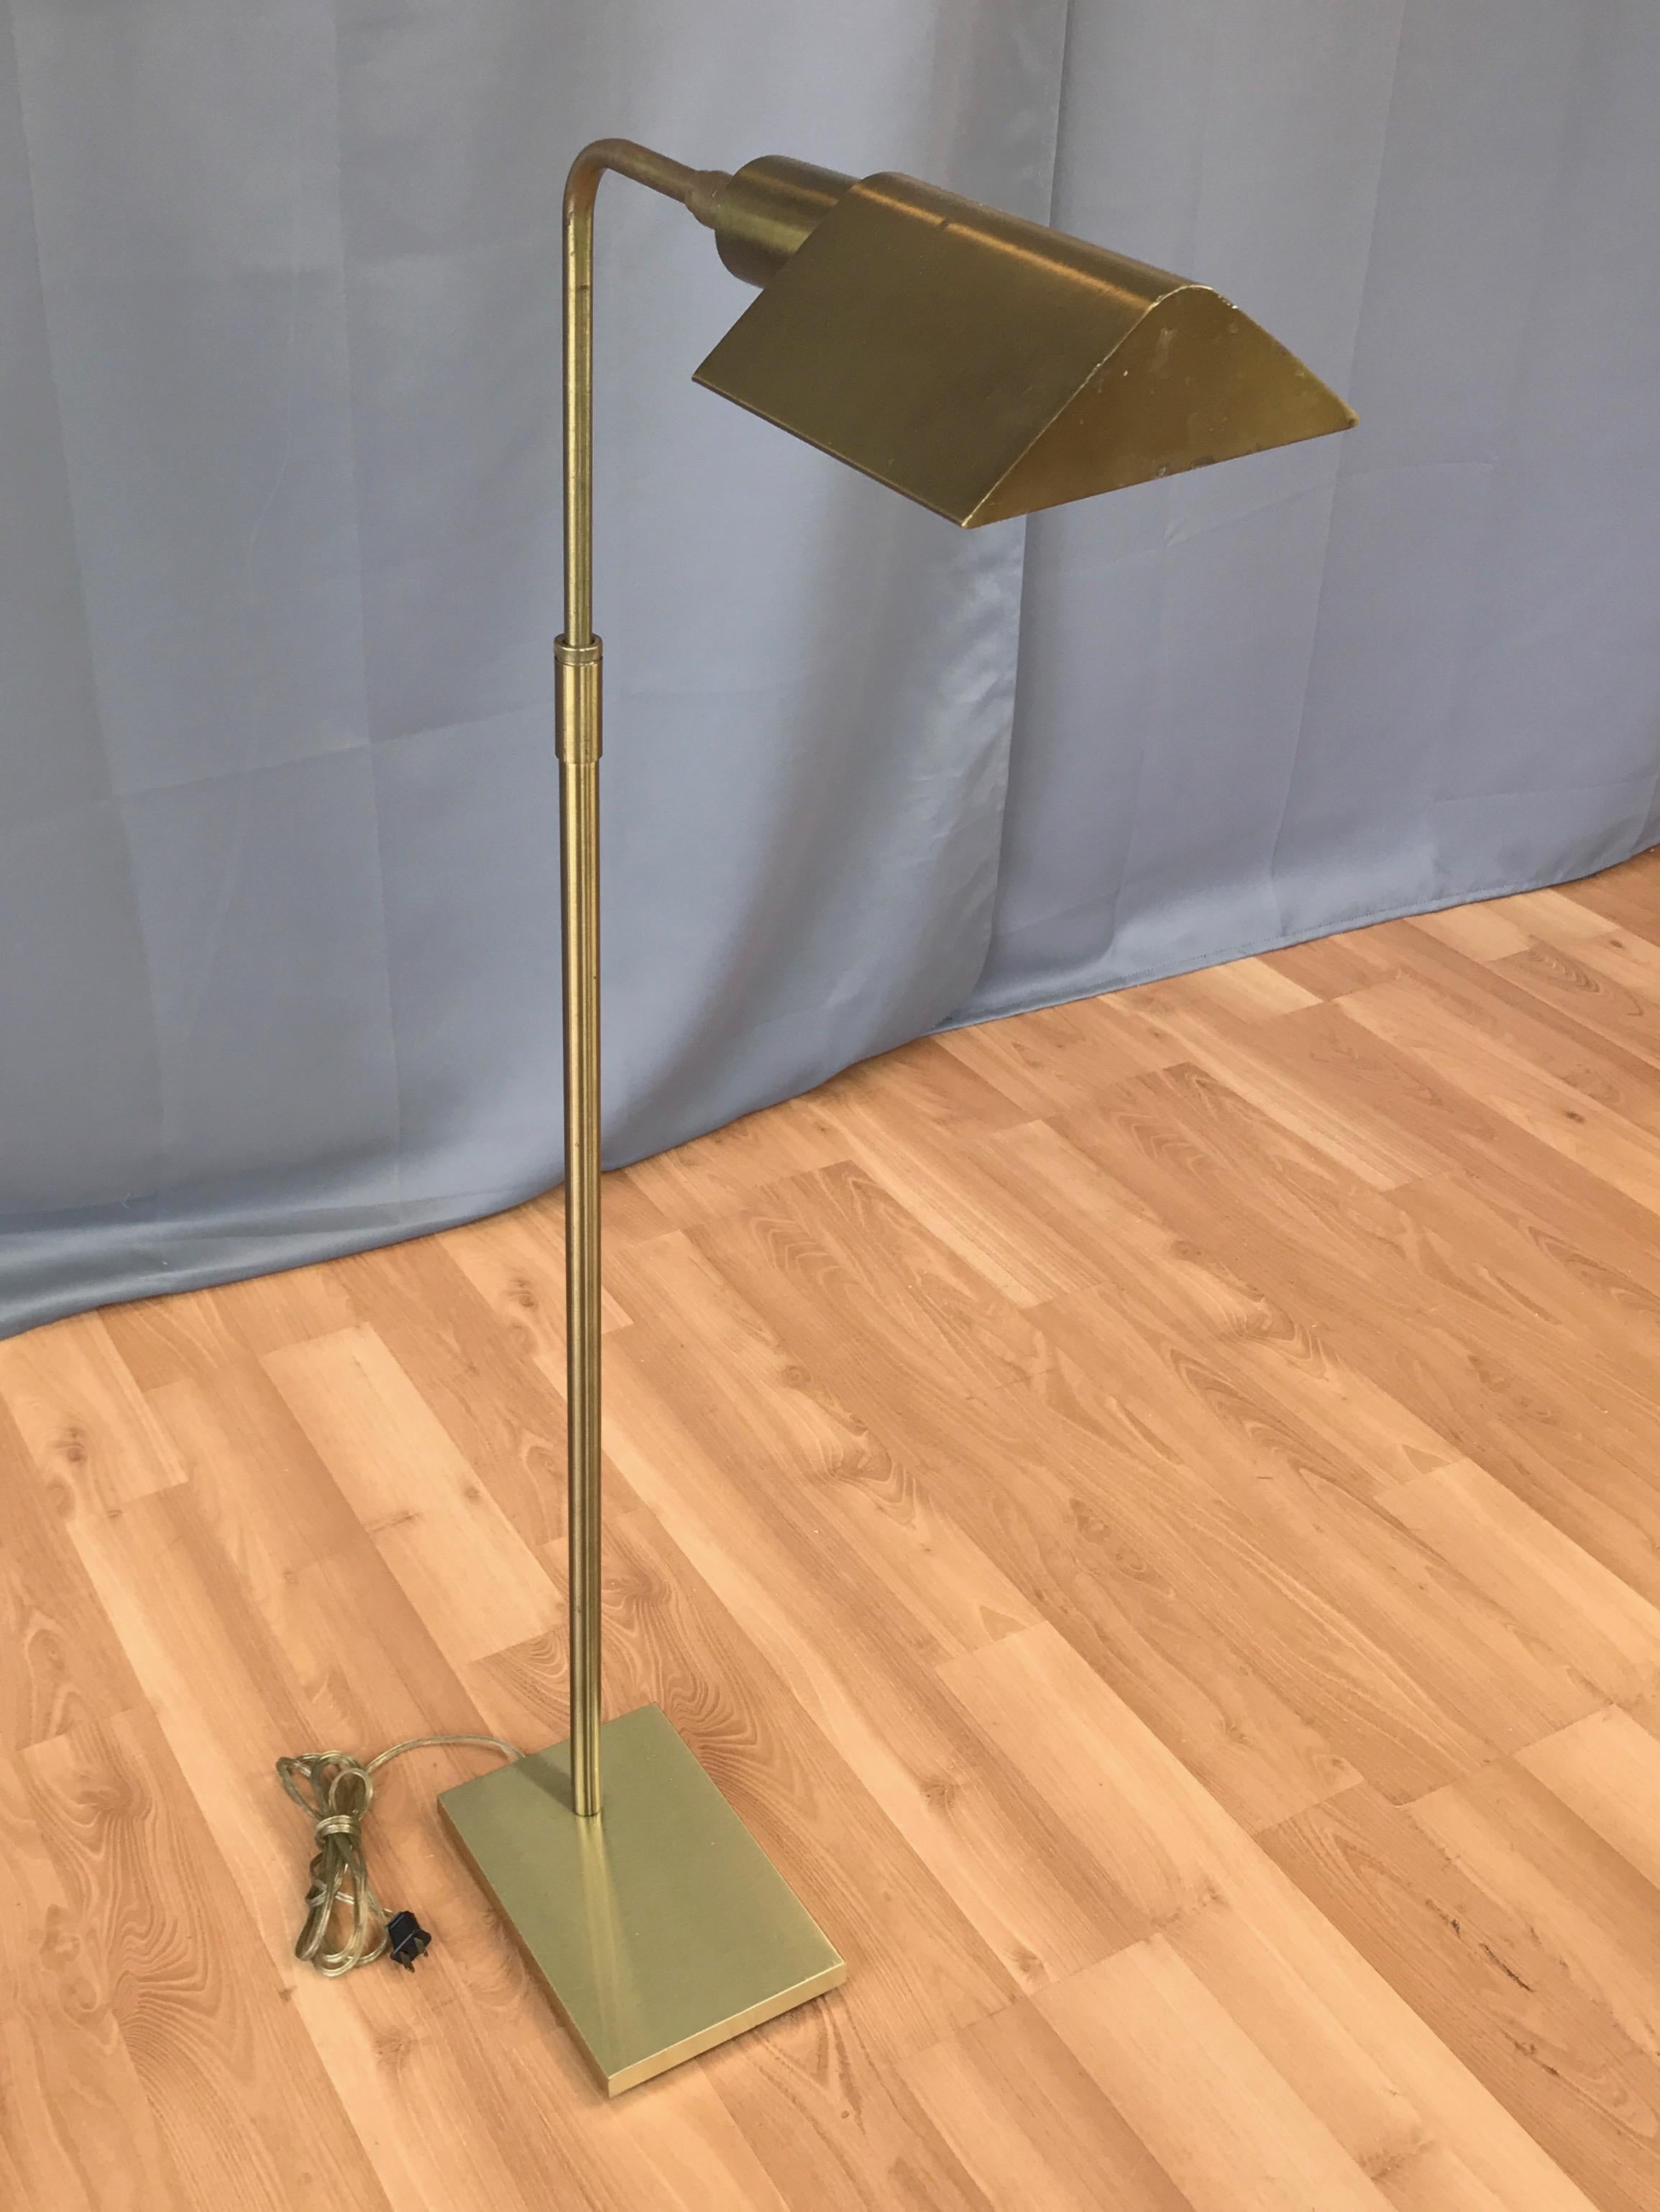 A 1960s pharmacy-style brass floor lamp by Koch & Lowy.

Adjustable height articulated and rotatable shade makes this timeless classic an ideal chair-side reading lamp. Shade and neck have a less common slightly muted, faintly brushed finish.